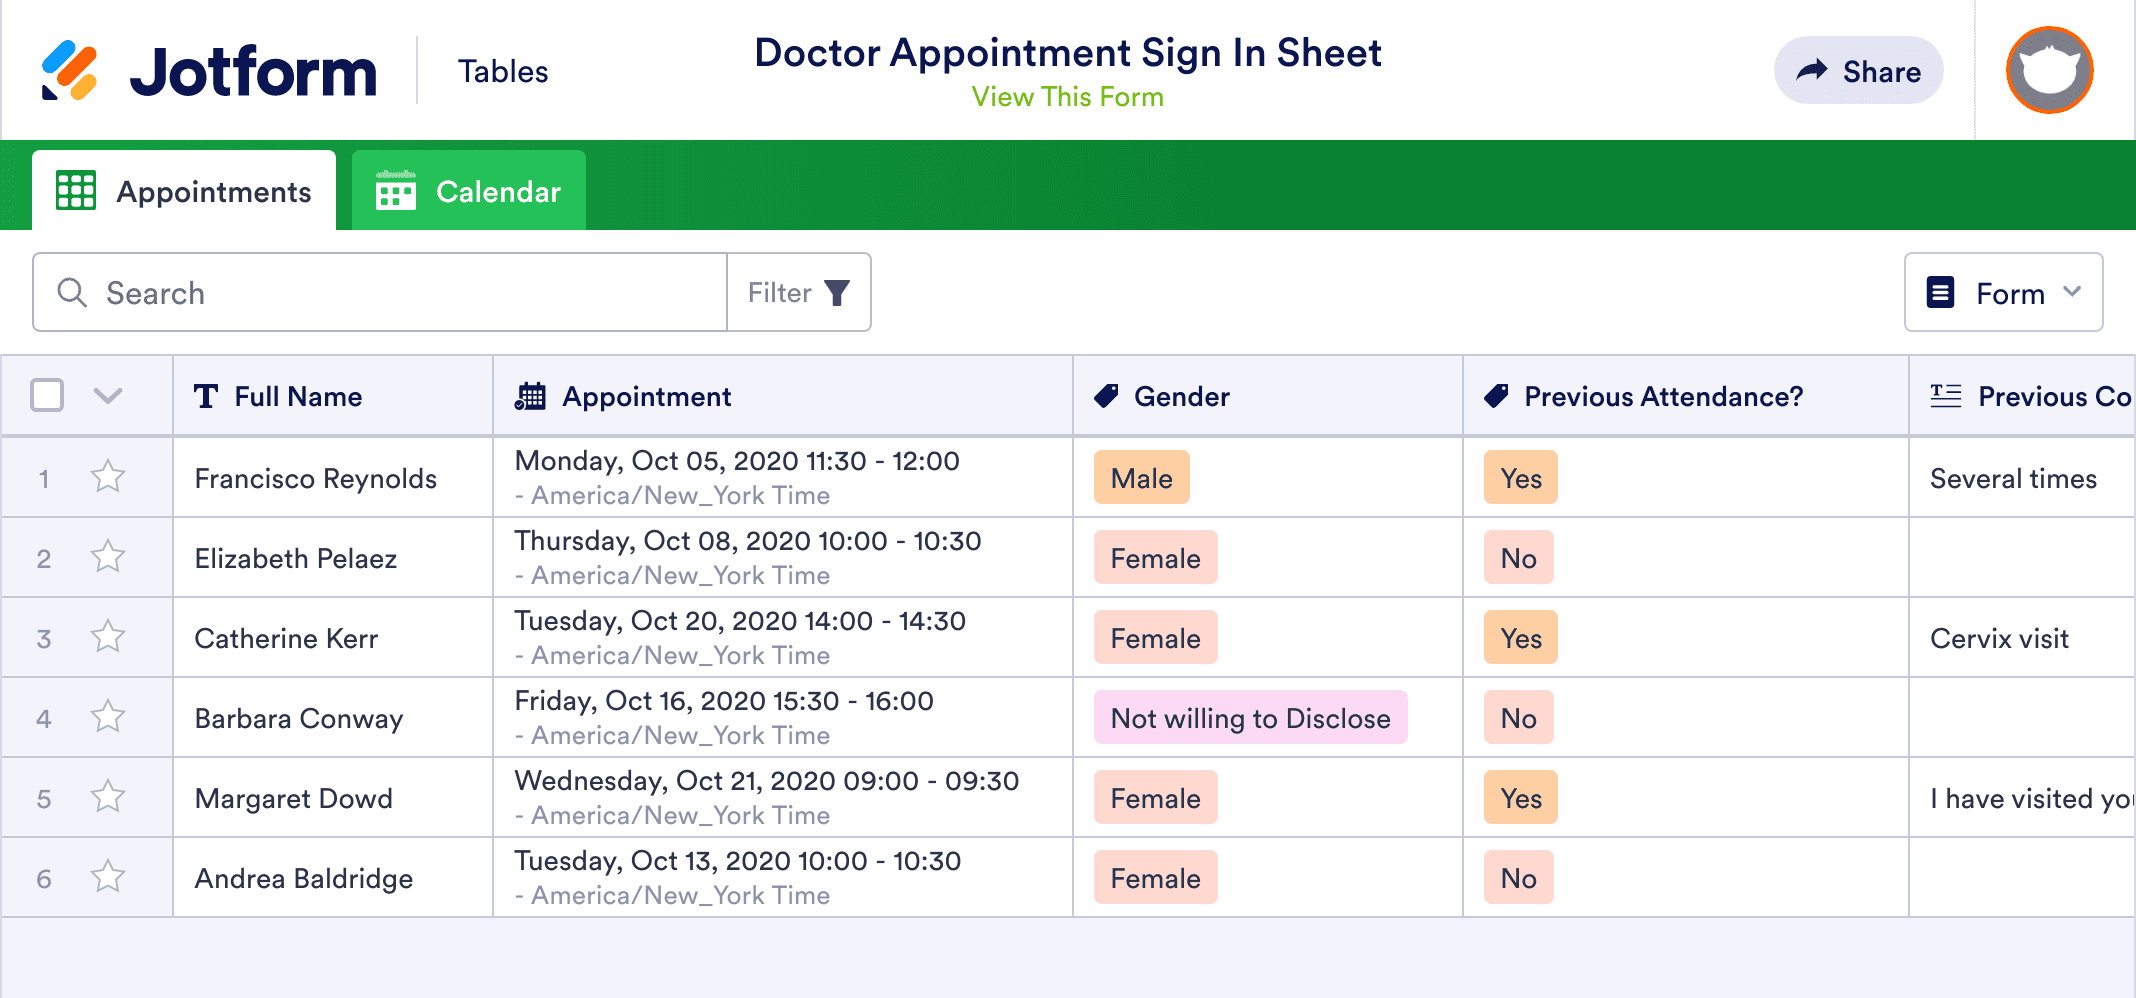 Doctor Appointment Sign In Sheet